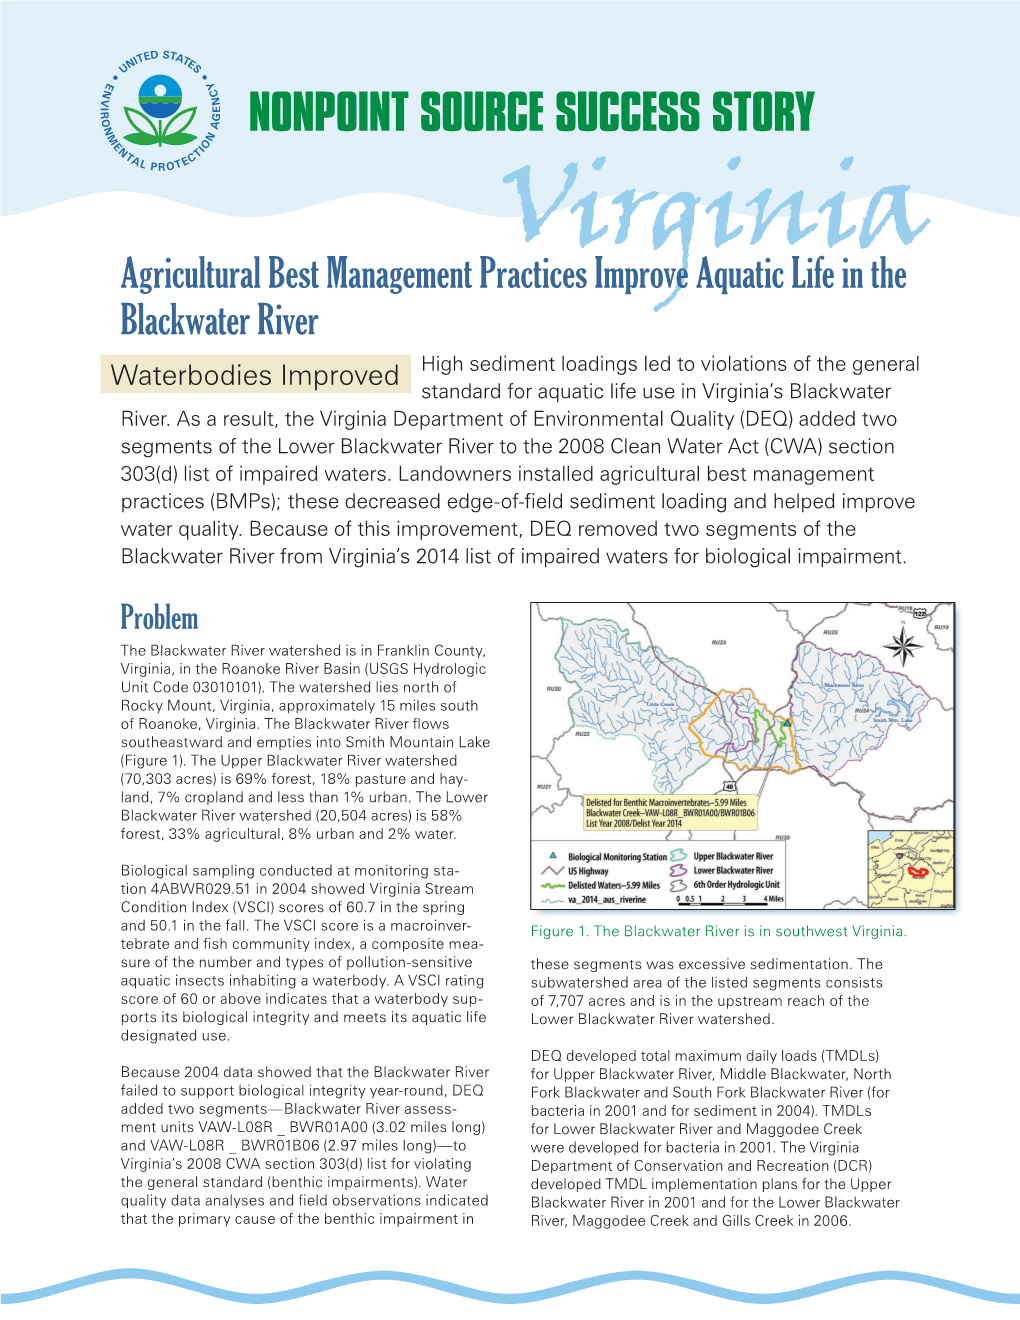 Blackwater River Waterbodies Improved High Sediment Loadings Led to Violations of the General Standard for Aquatic Life Use in Virginia’S Blackwater River